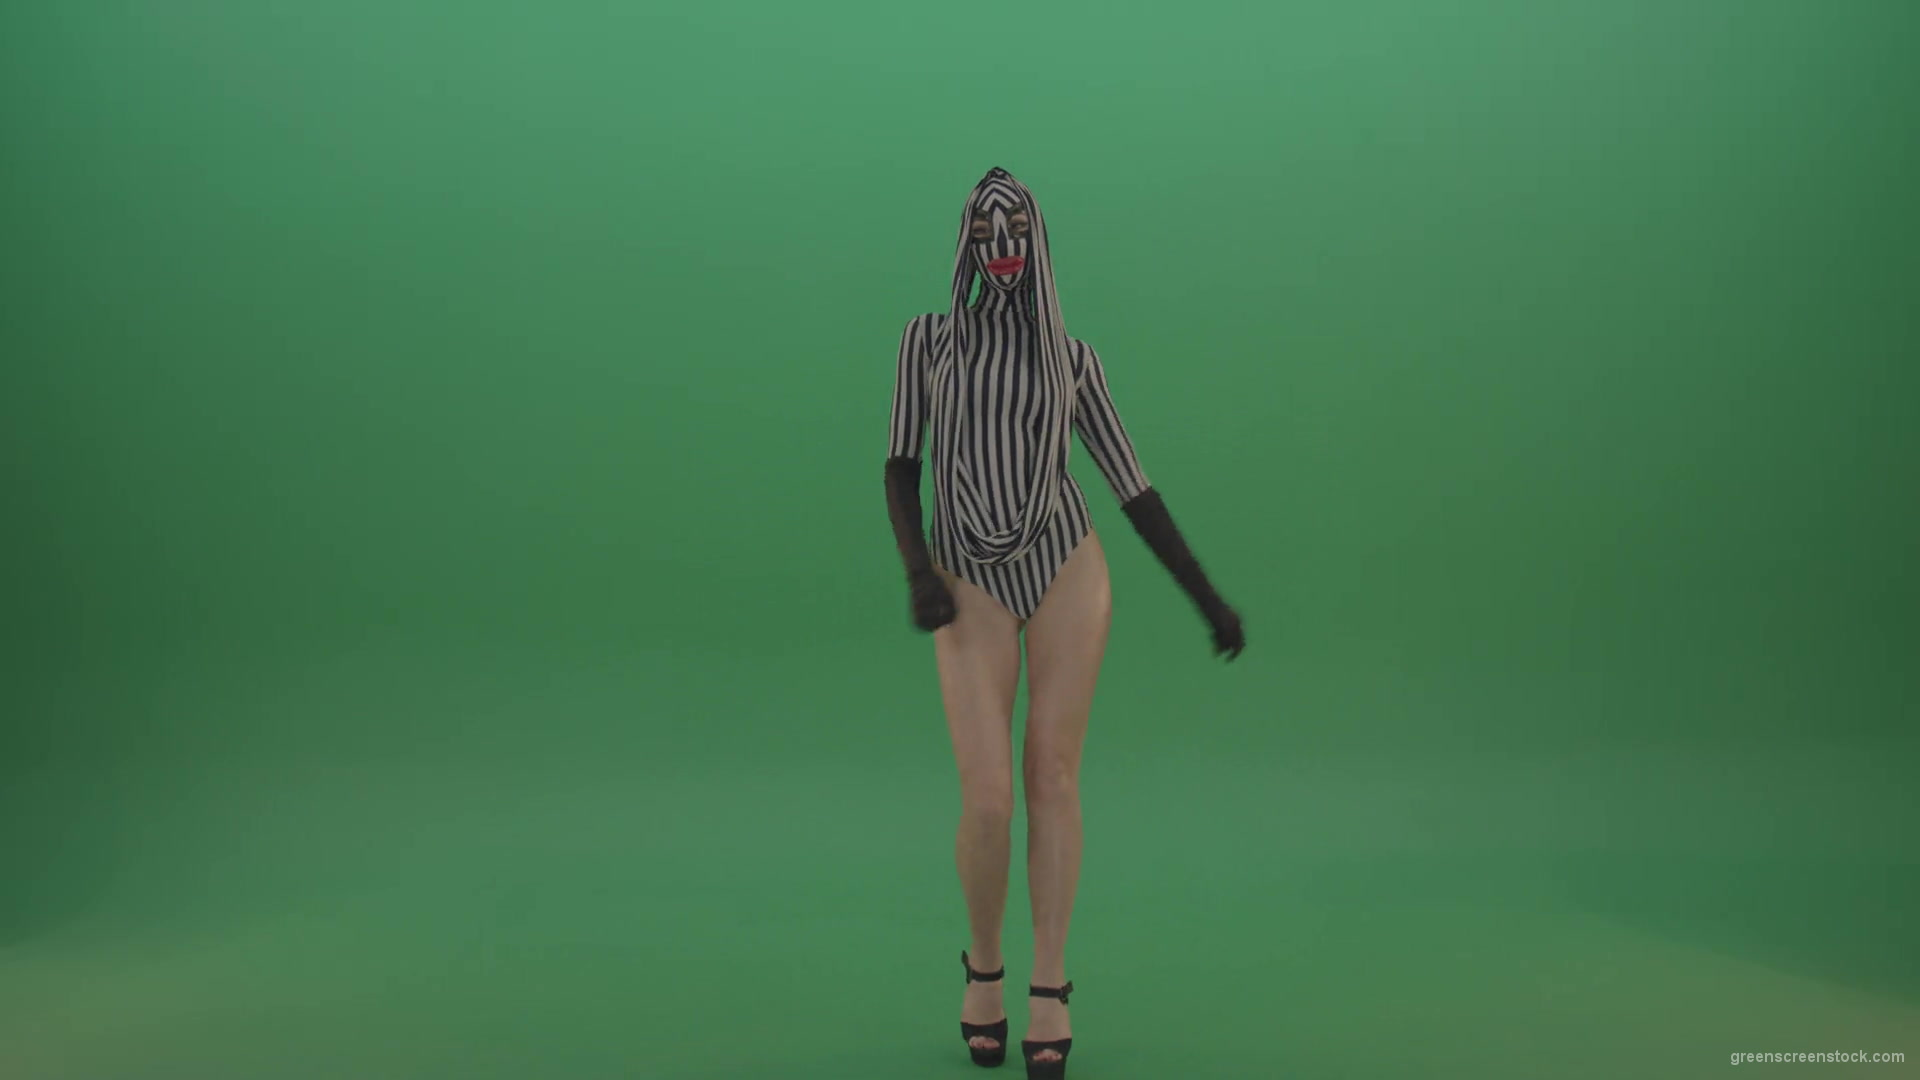 Long-legs-girl-march-in-white-black-stripe-costume-and-mask-on-green-screen-1920_004 Green Screen Stock